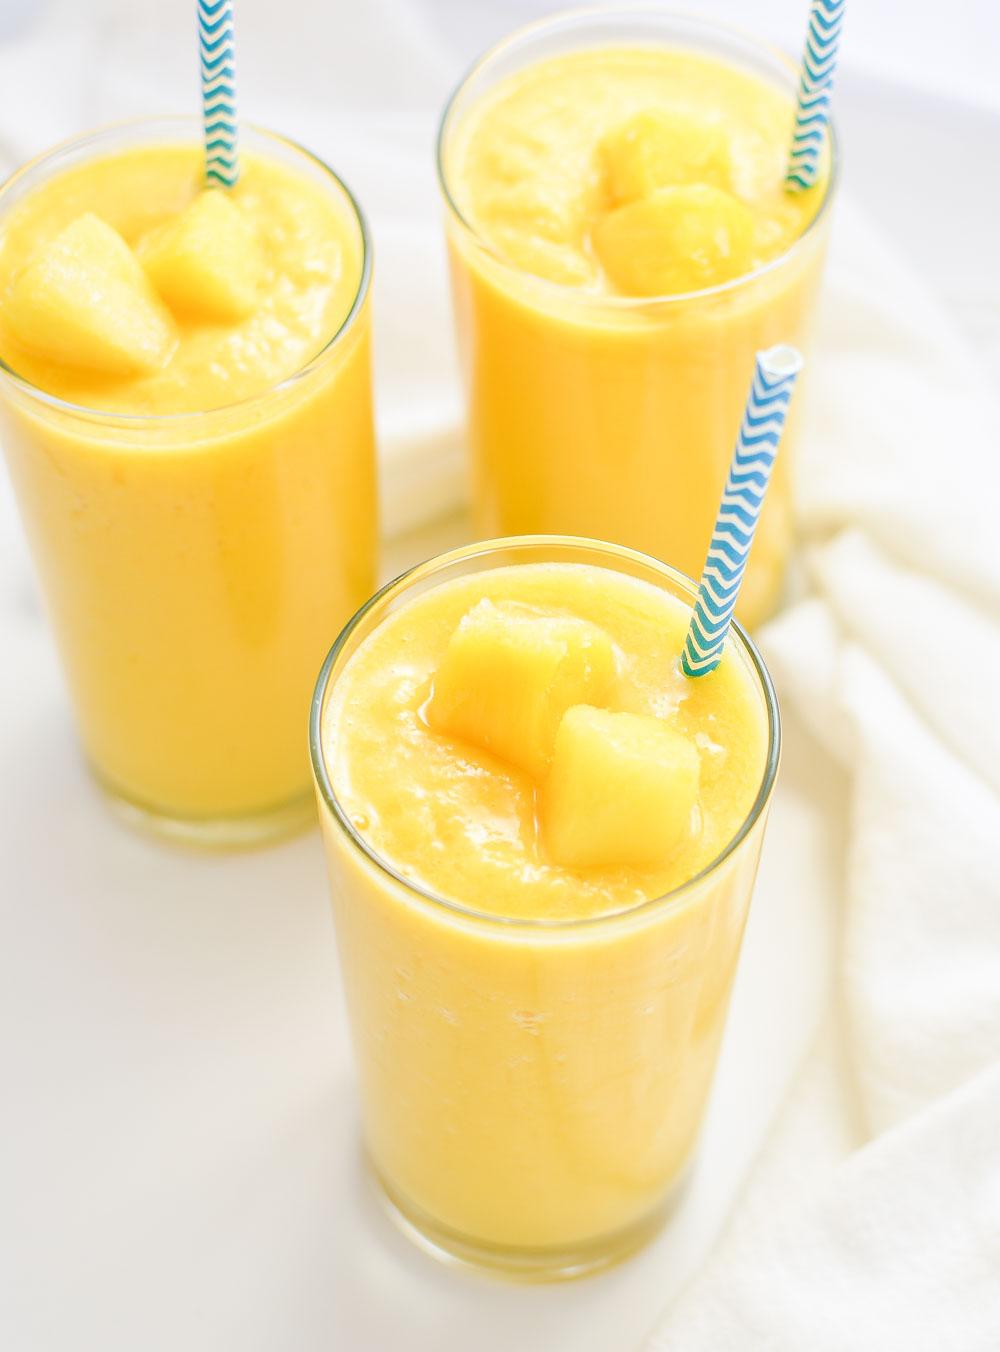 Orange pineapple smoothies are a great and refreshing way to start the day!